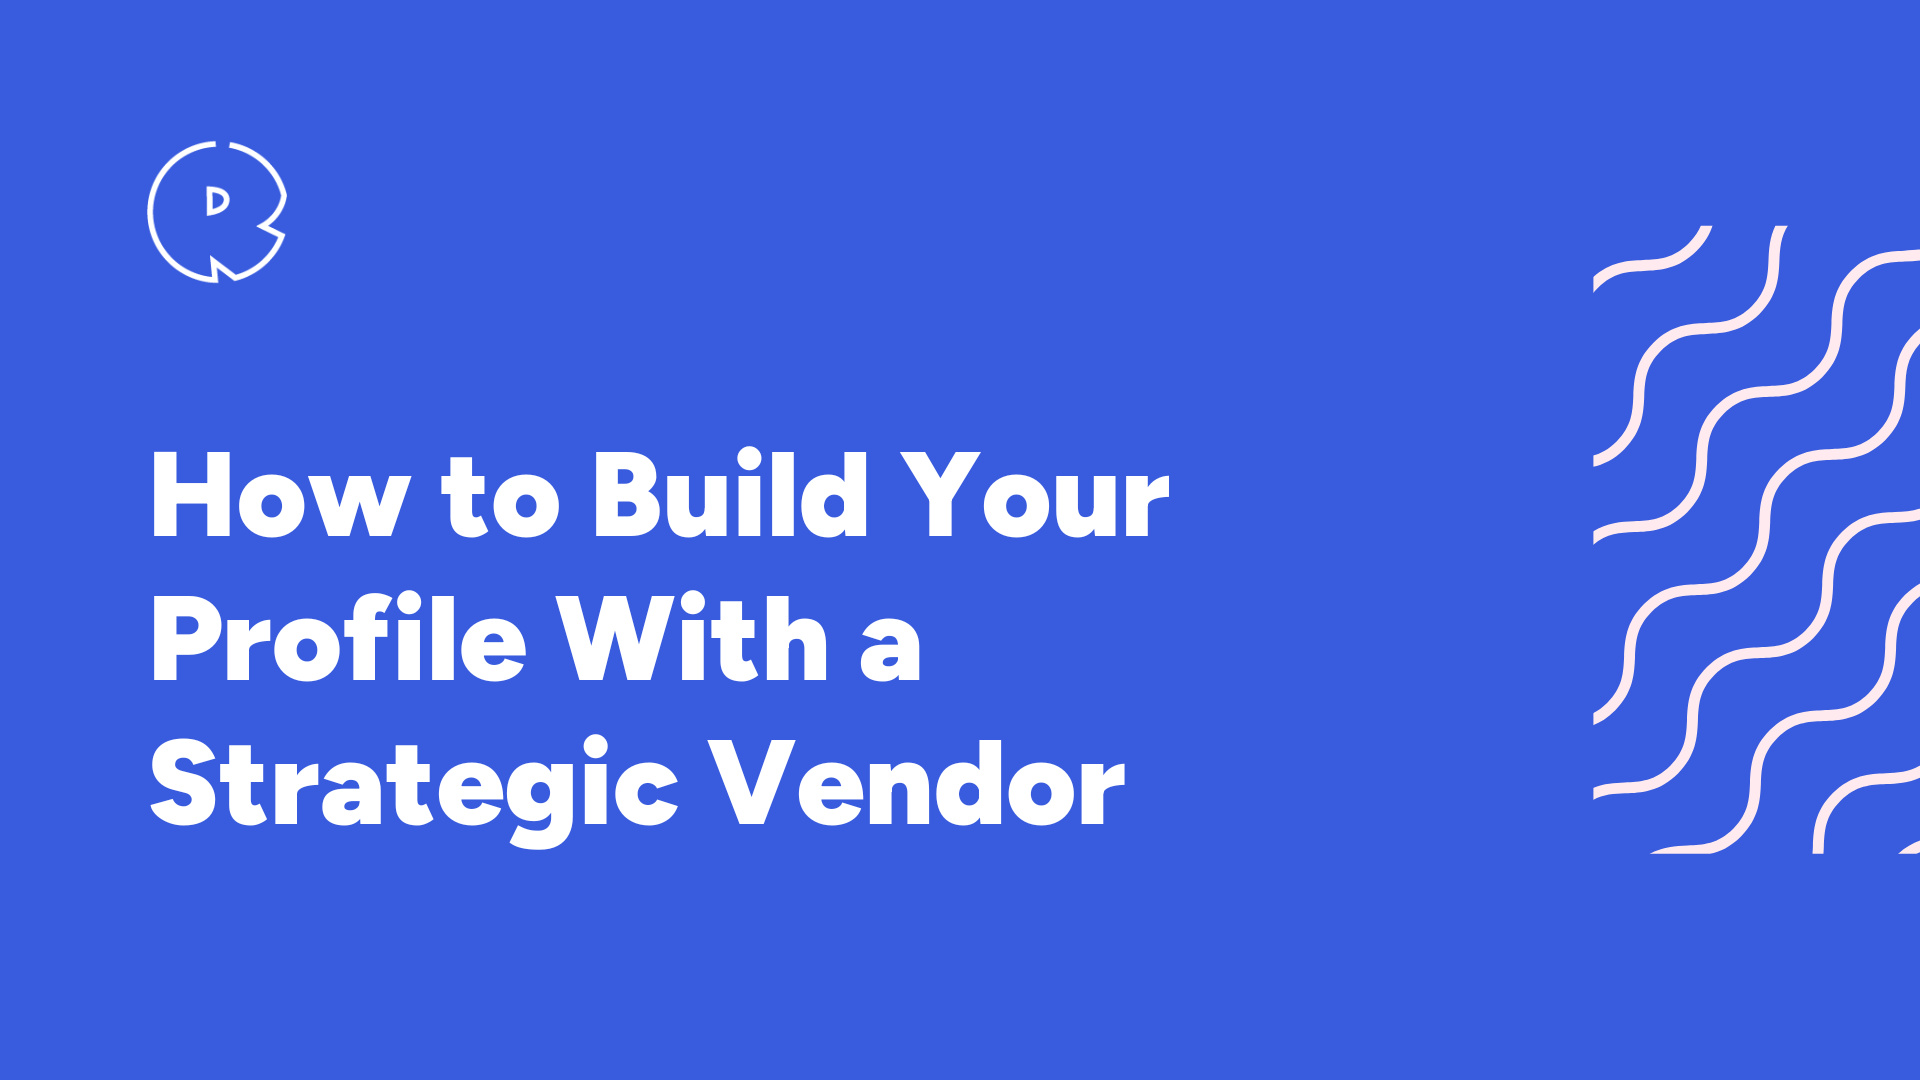 How to Build Your Profile With a Strategic Vendor